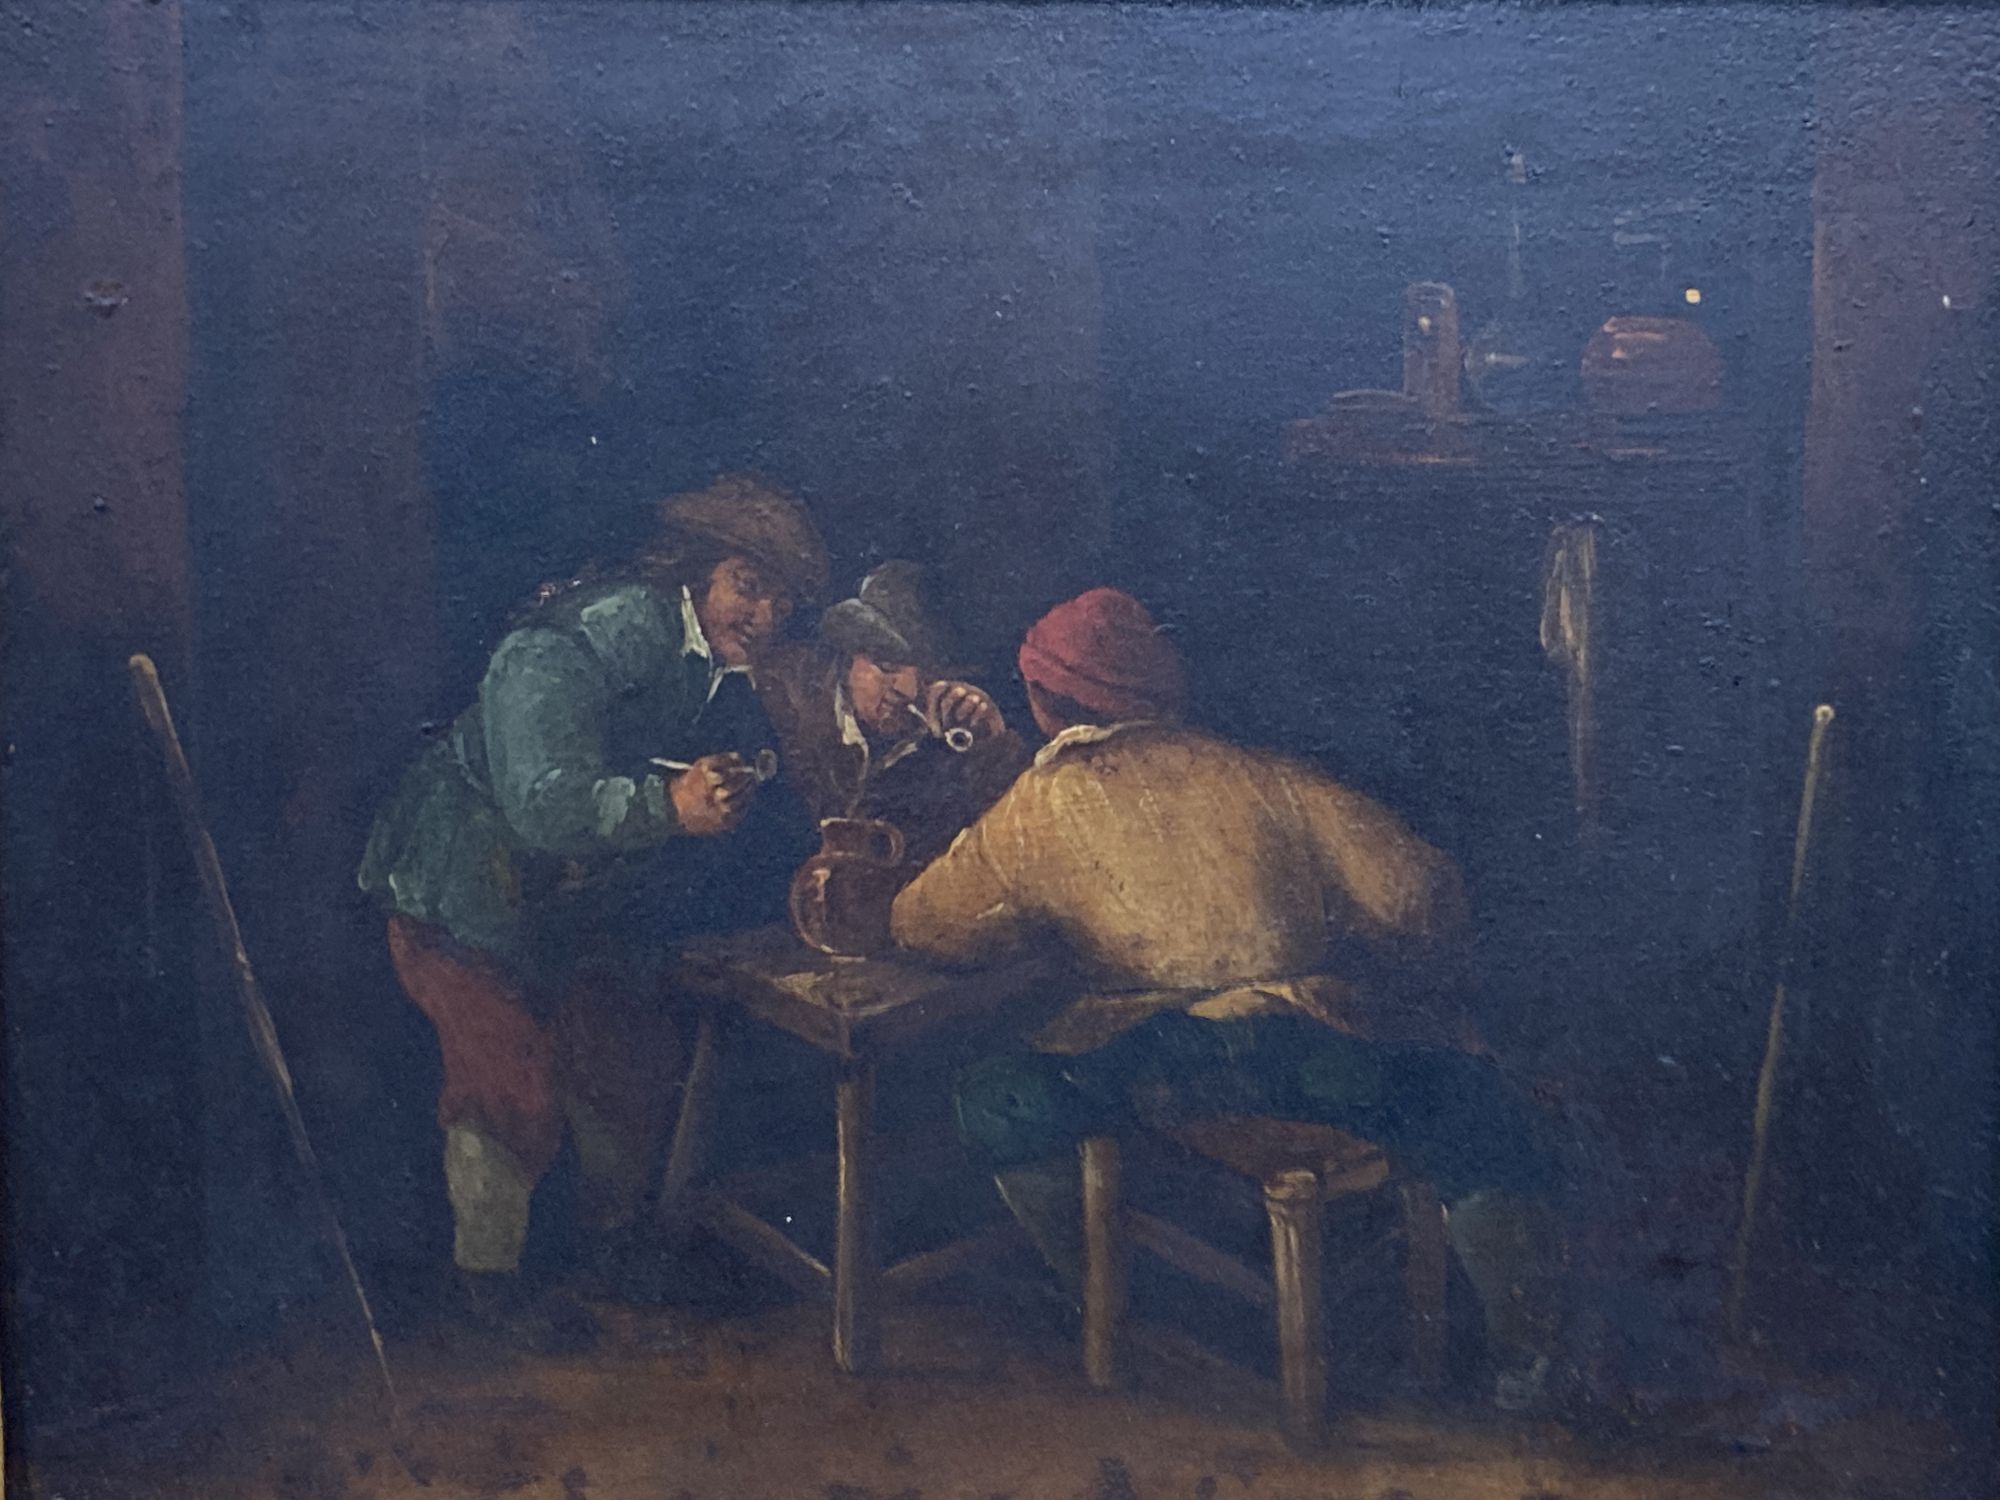 After Adriaen Van Ostade (1610-1685), oil on wooden panel, Interior with pipe smokers, 19 x 24.5cm